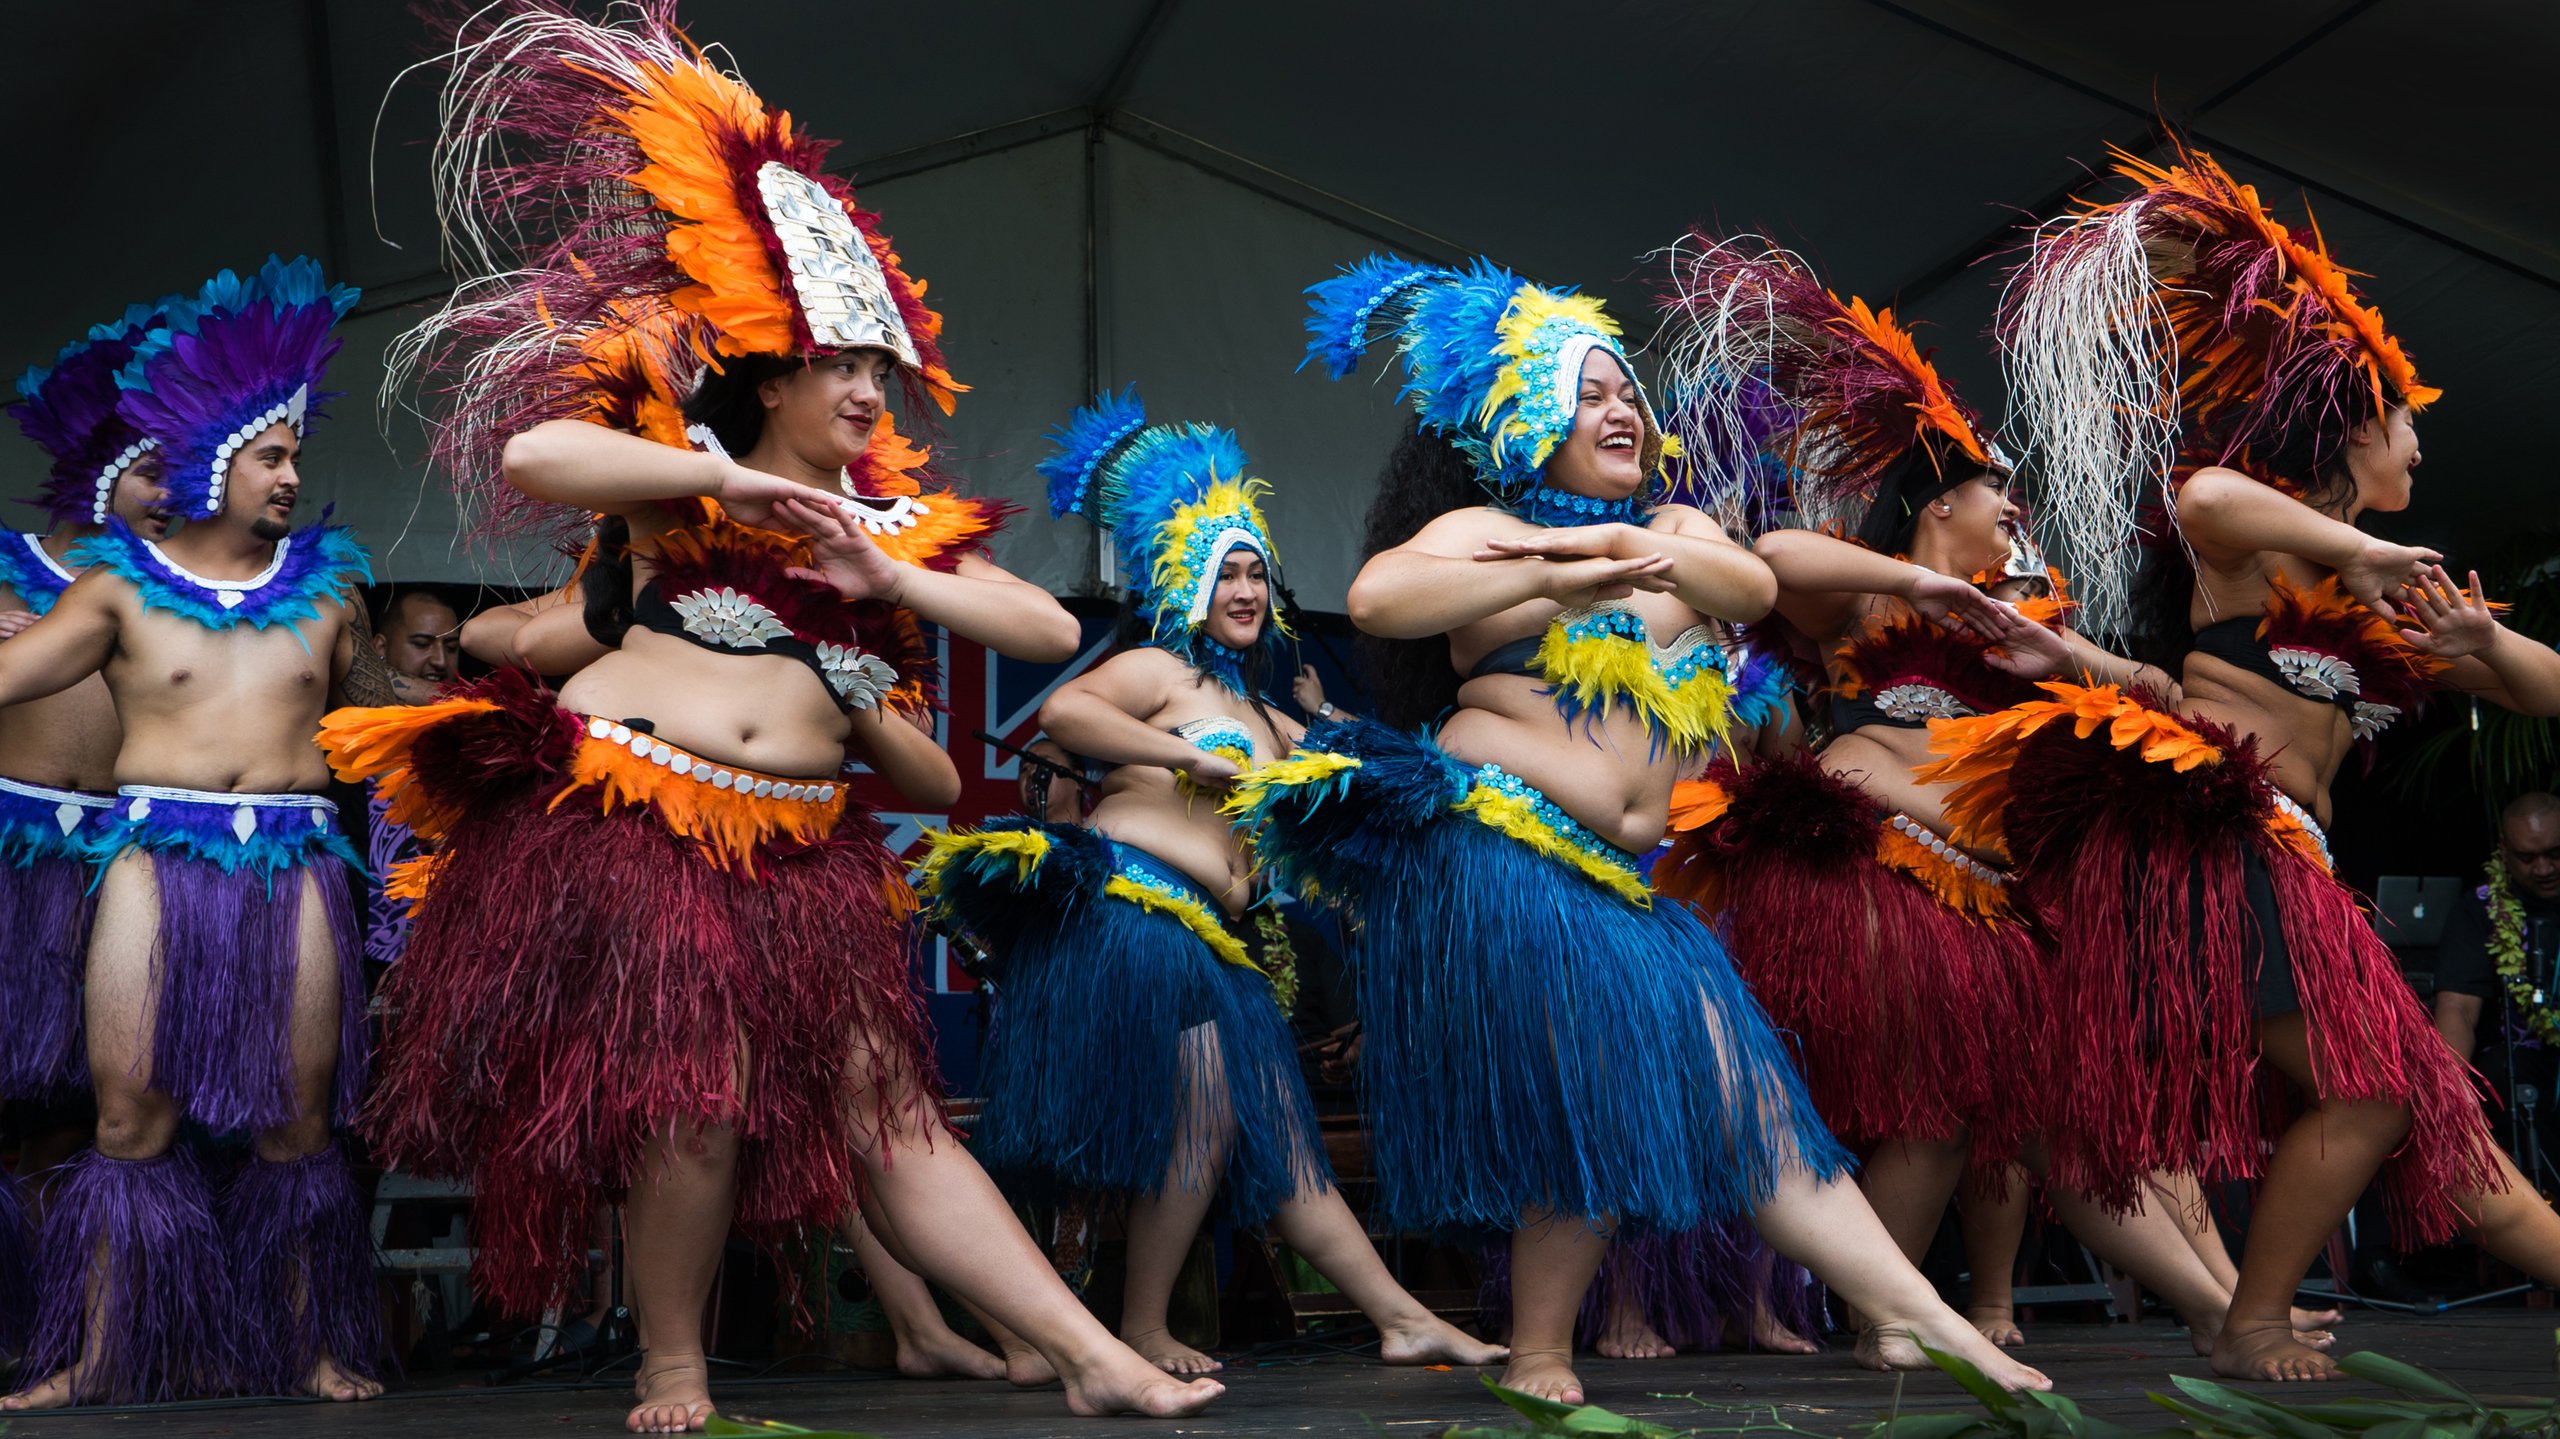 Auckland Pasifika Festival comes alive this weekend